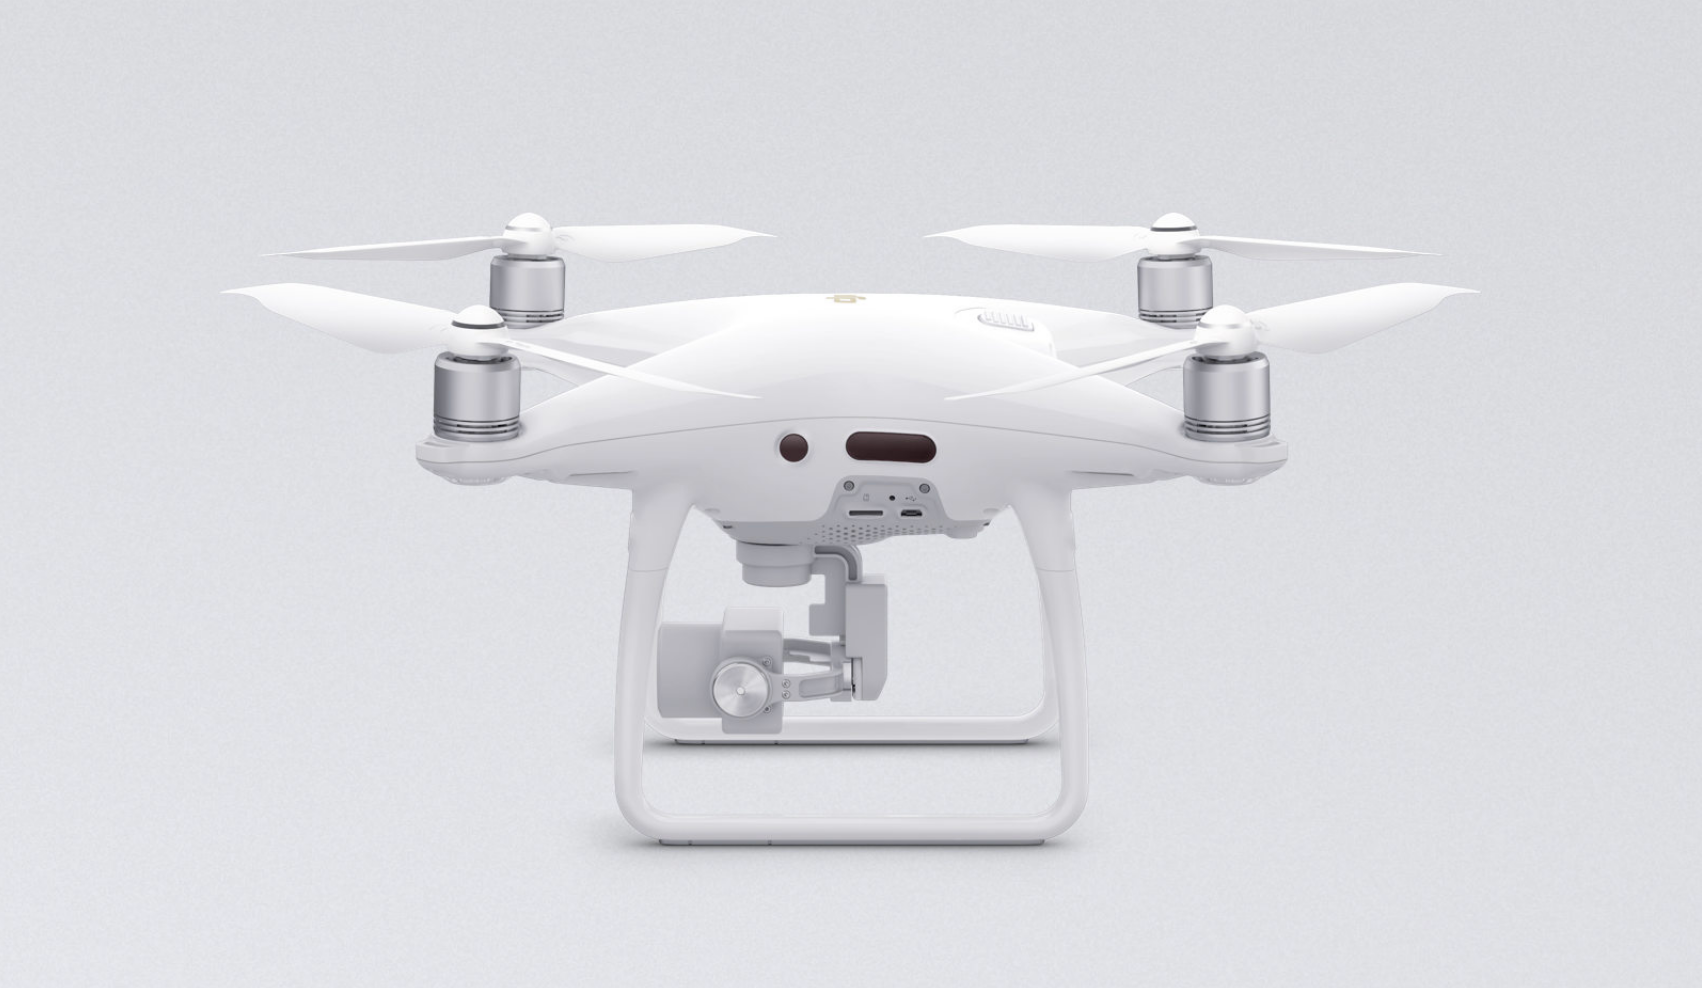 DJI Refreshes Phantom 4 Pro With Improved Video and Obstacle Avoidance